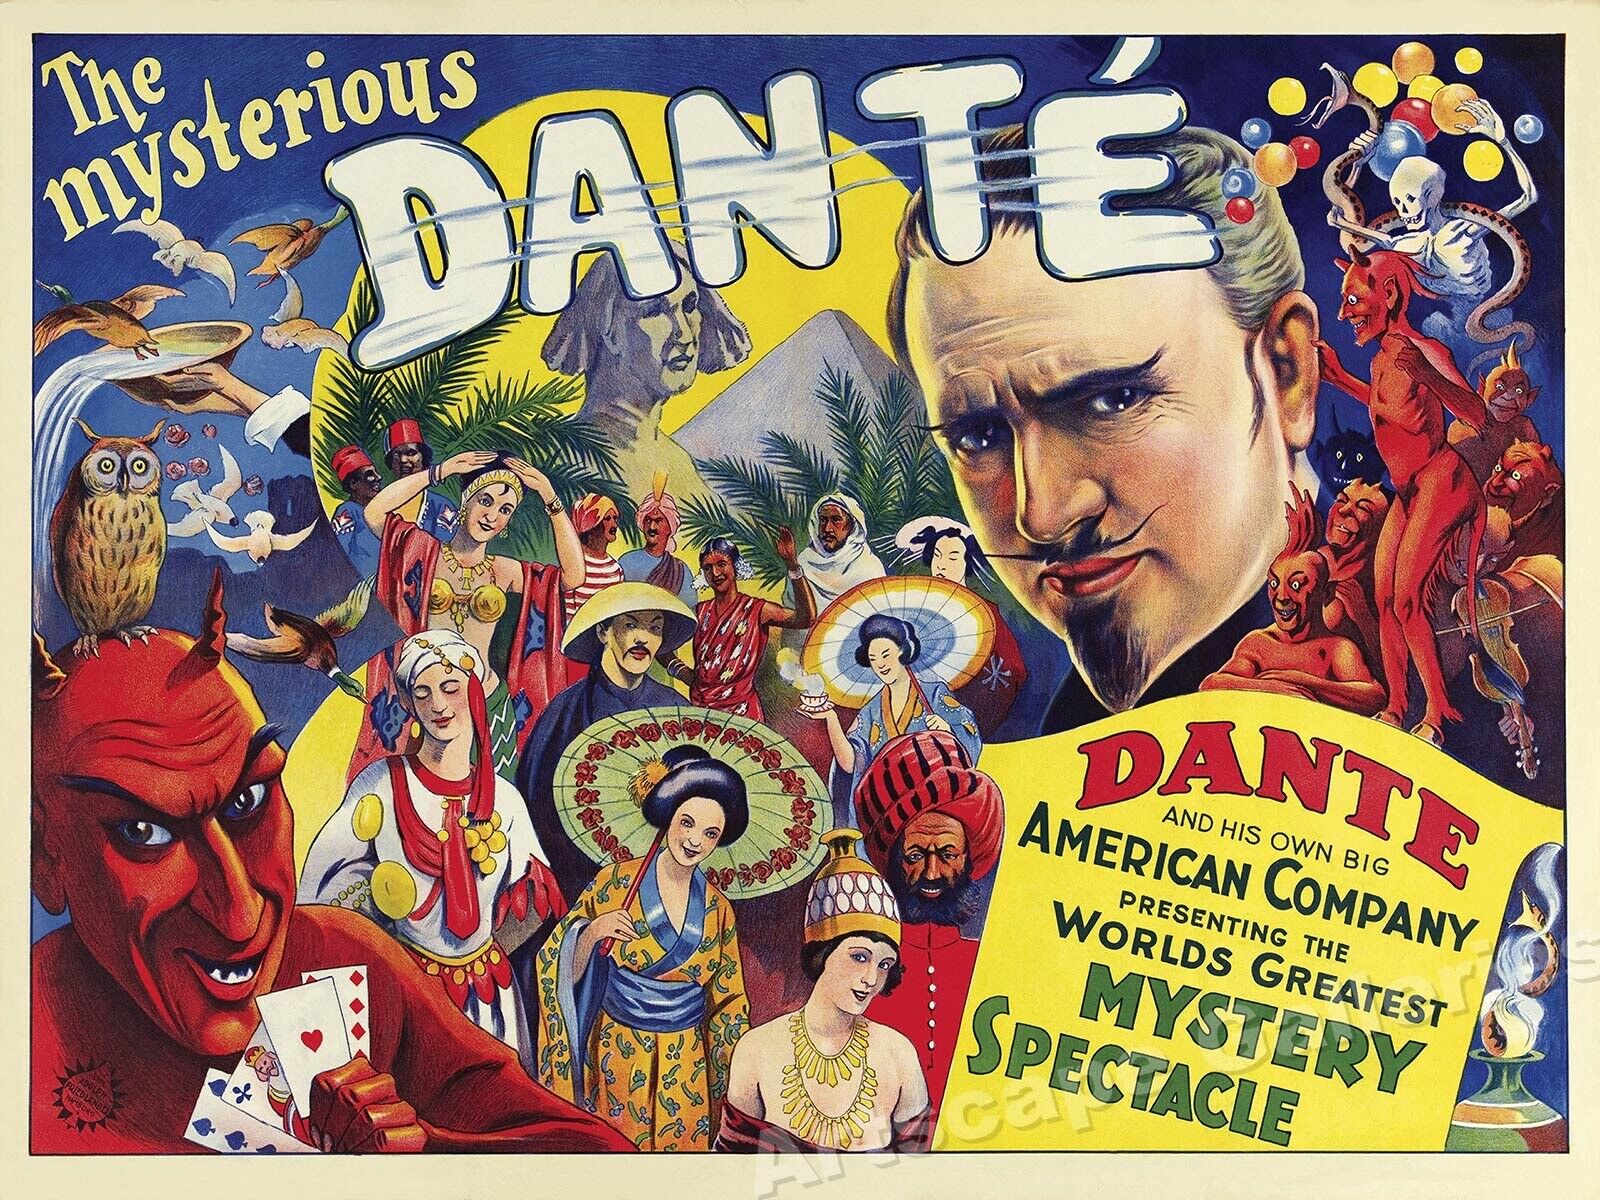 1931 Vintage Style Magic Poster - Dante Mystery Spectacle - 24x32